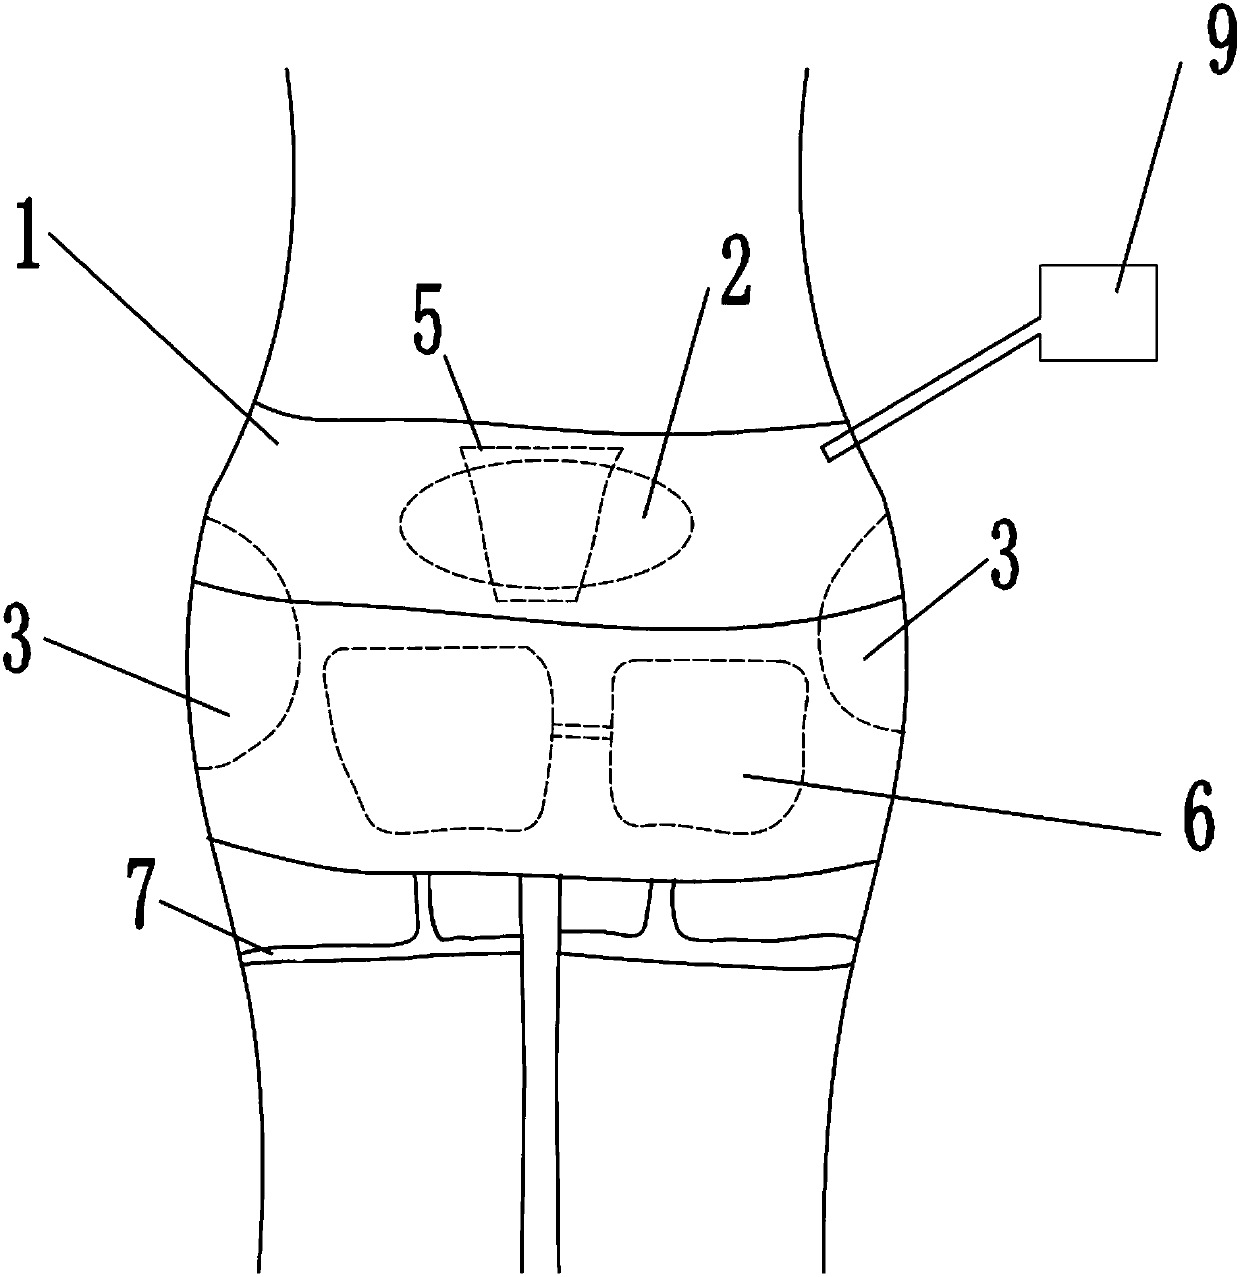 Buttock shrinking device